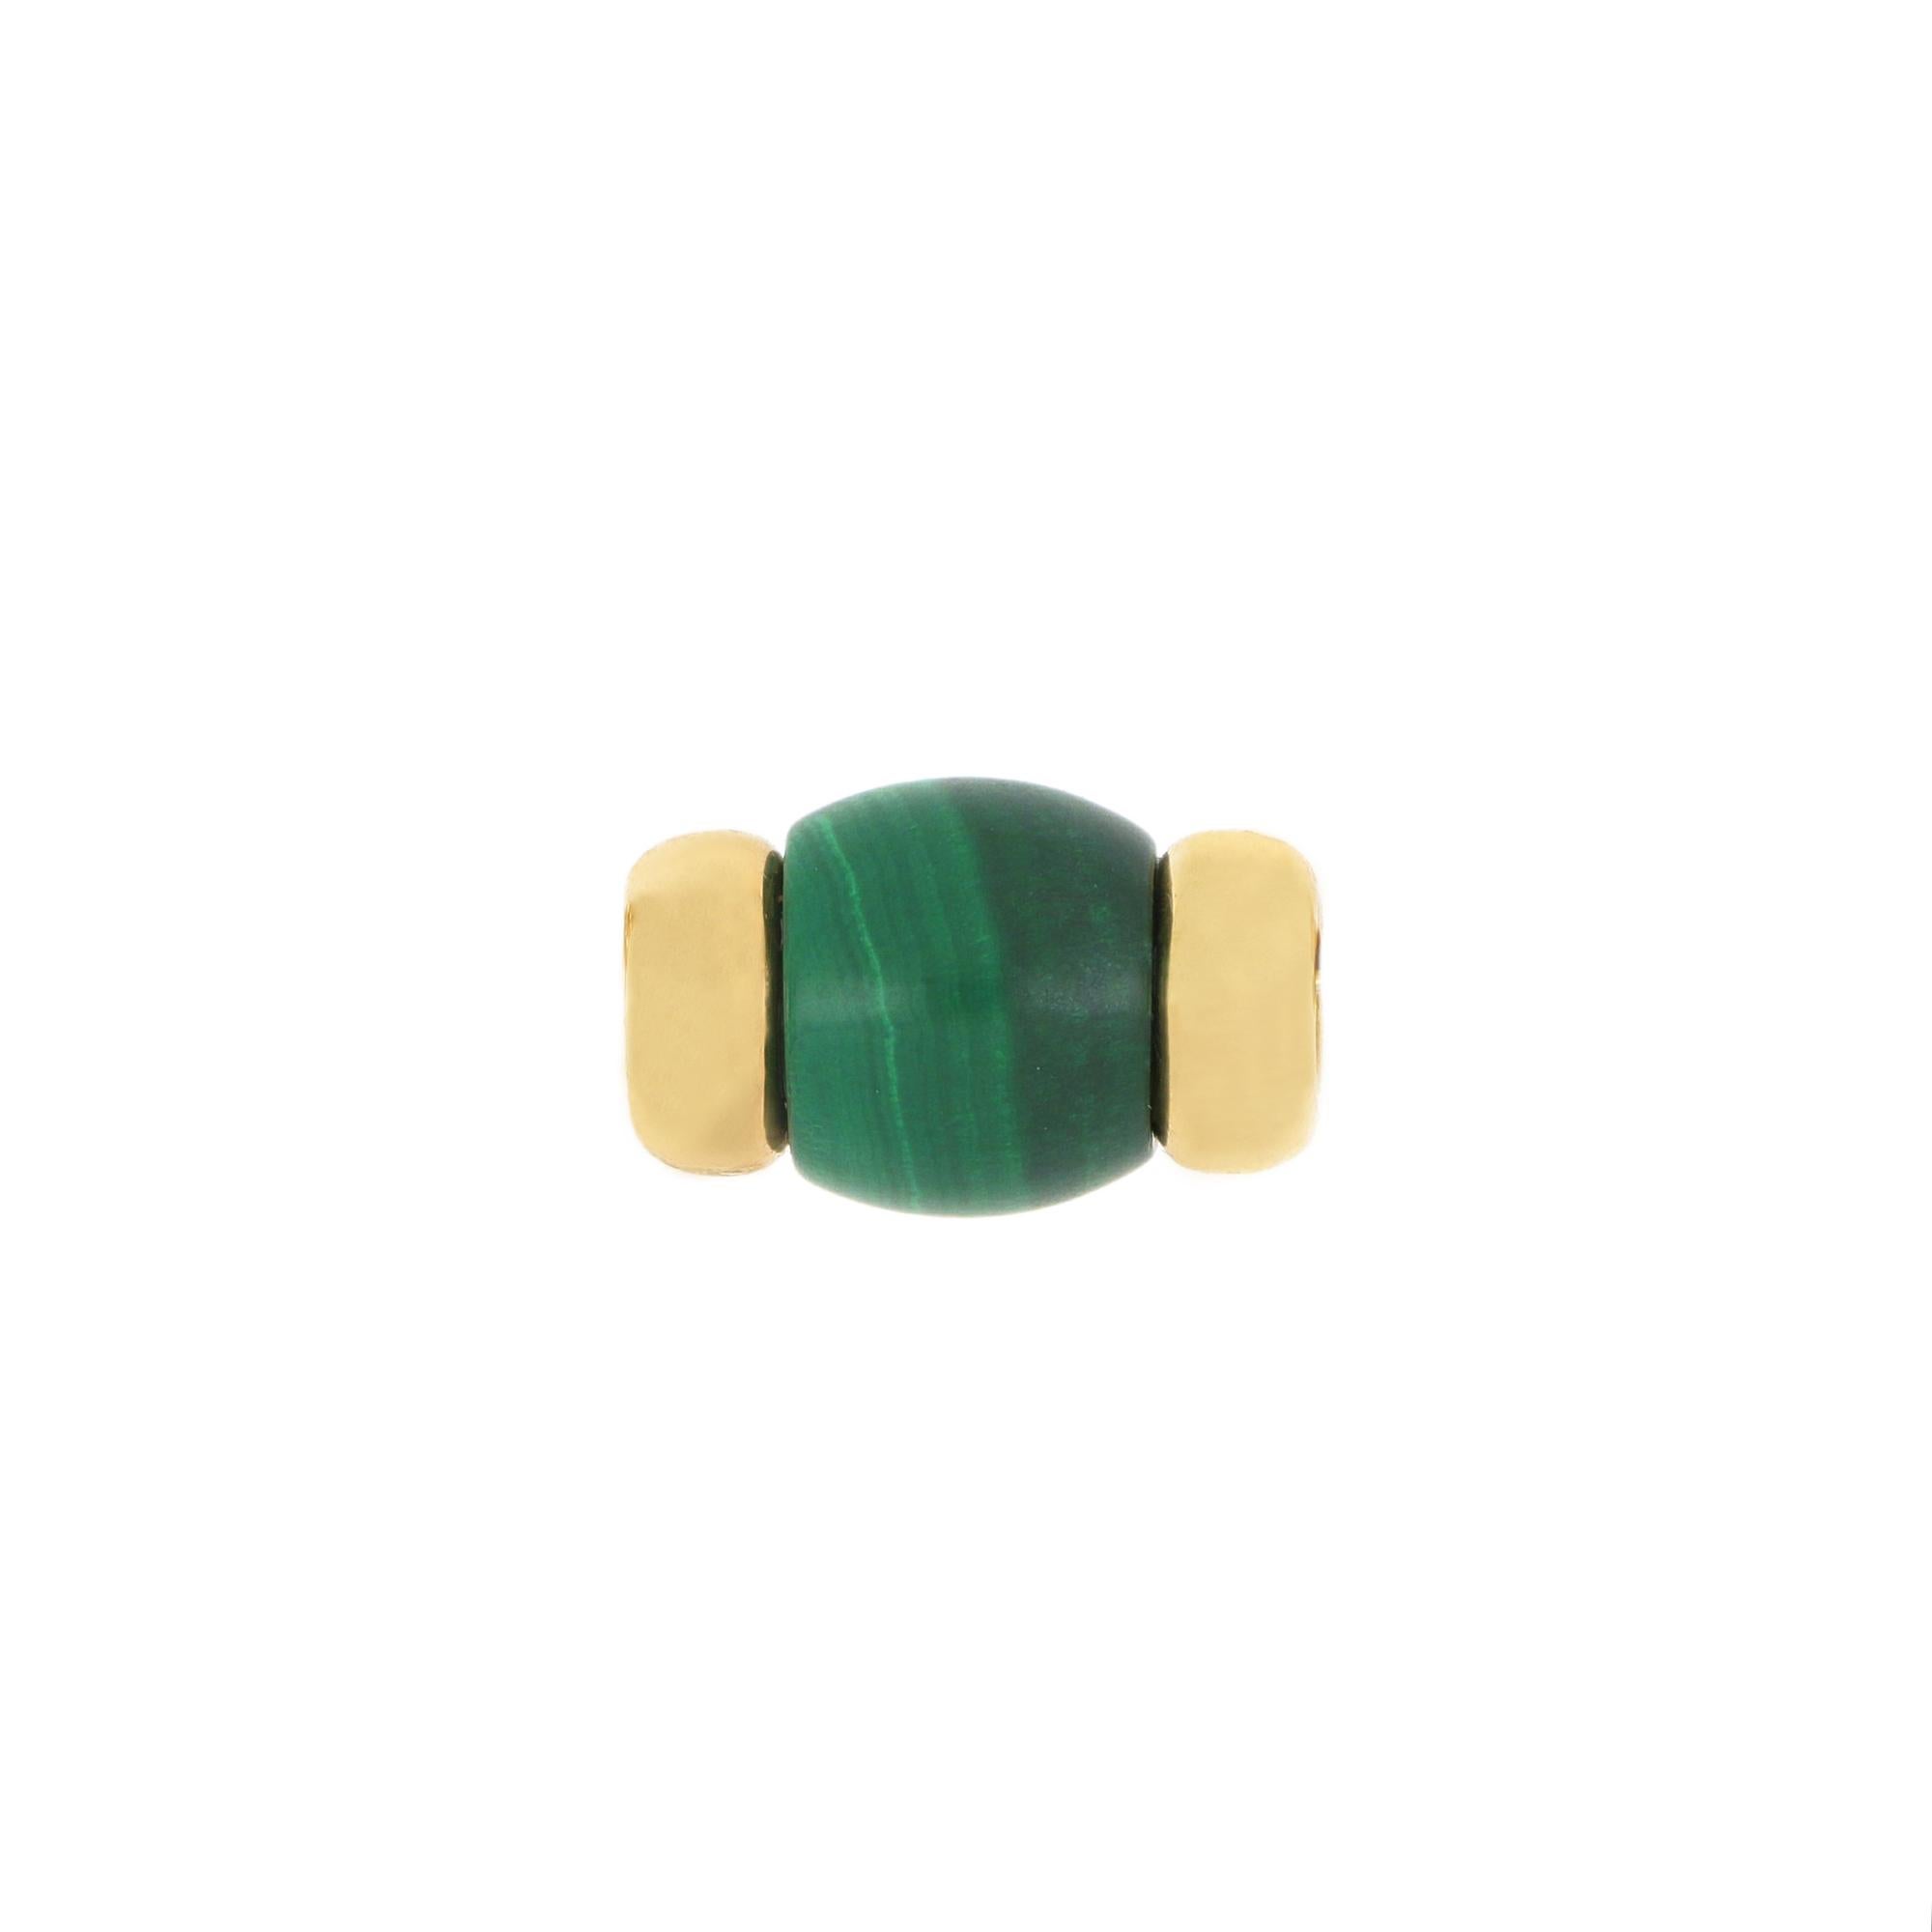 An expression of elegance and refinement, the ring from Le Carrousel collection, with its delicate barrel shape, blends harmoniously with the green of malachite. The sinuous interlacing of the 18-karat yellow gold structure represents the ring's